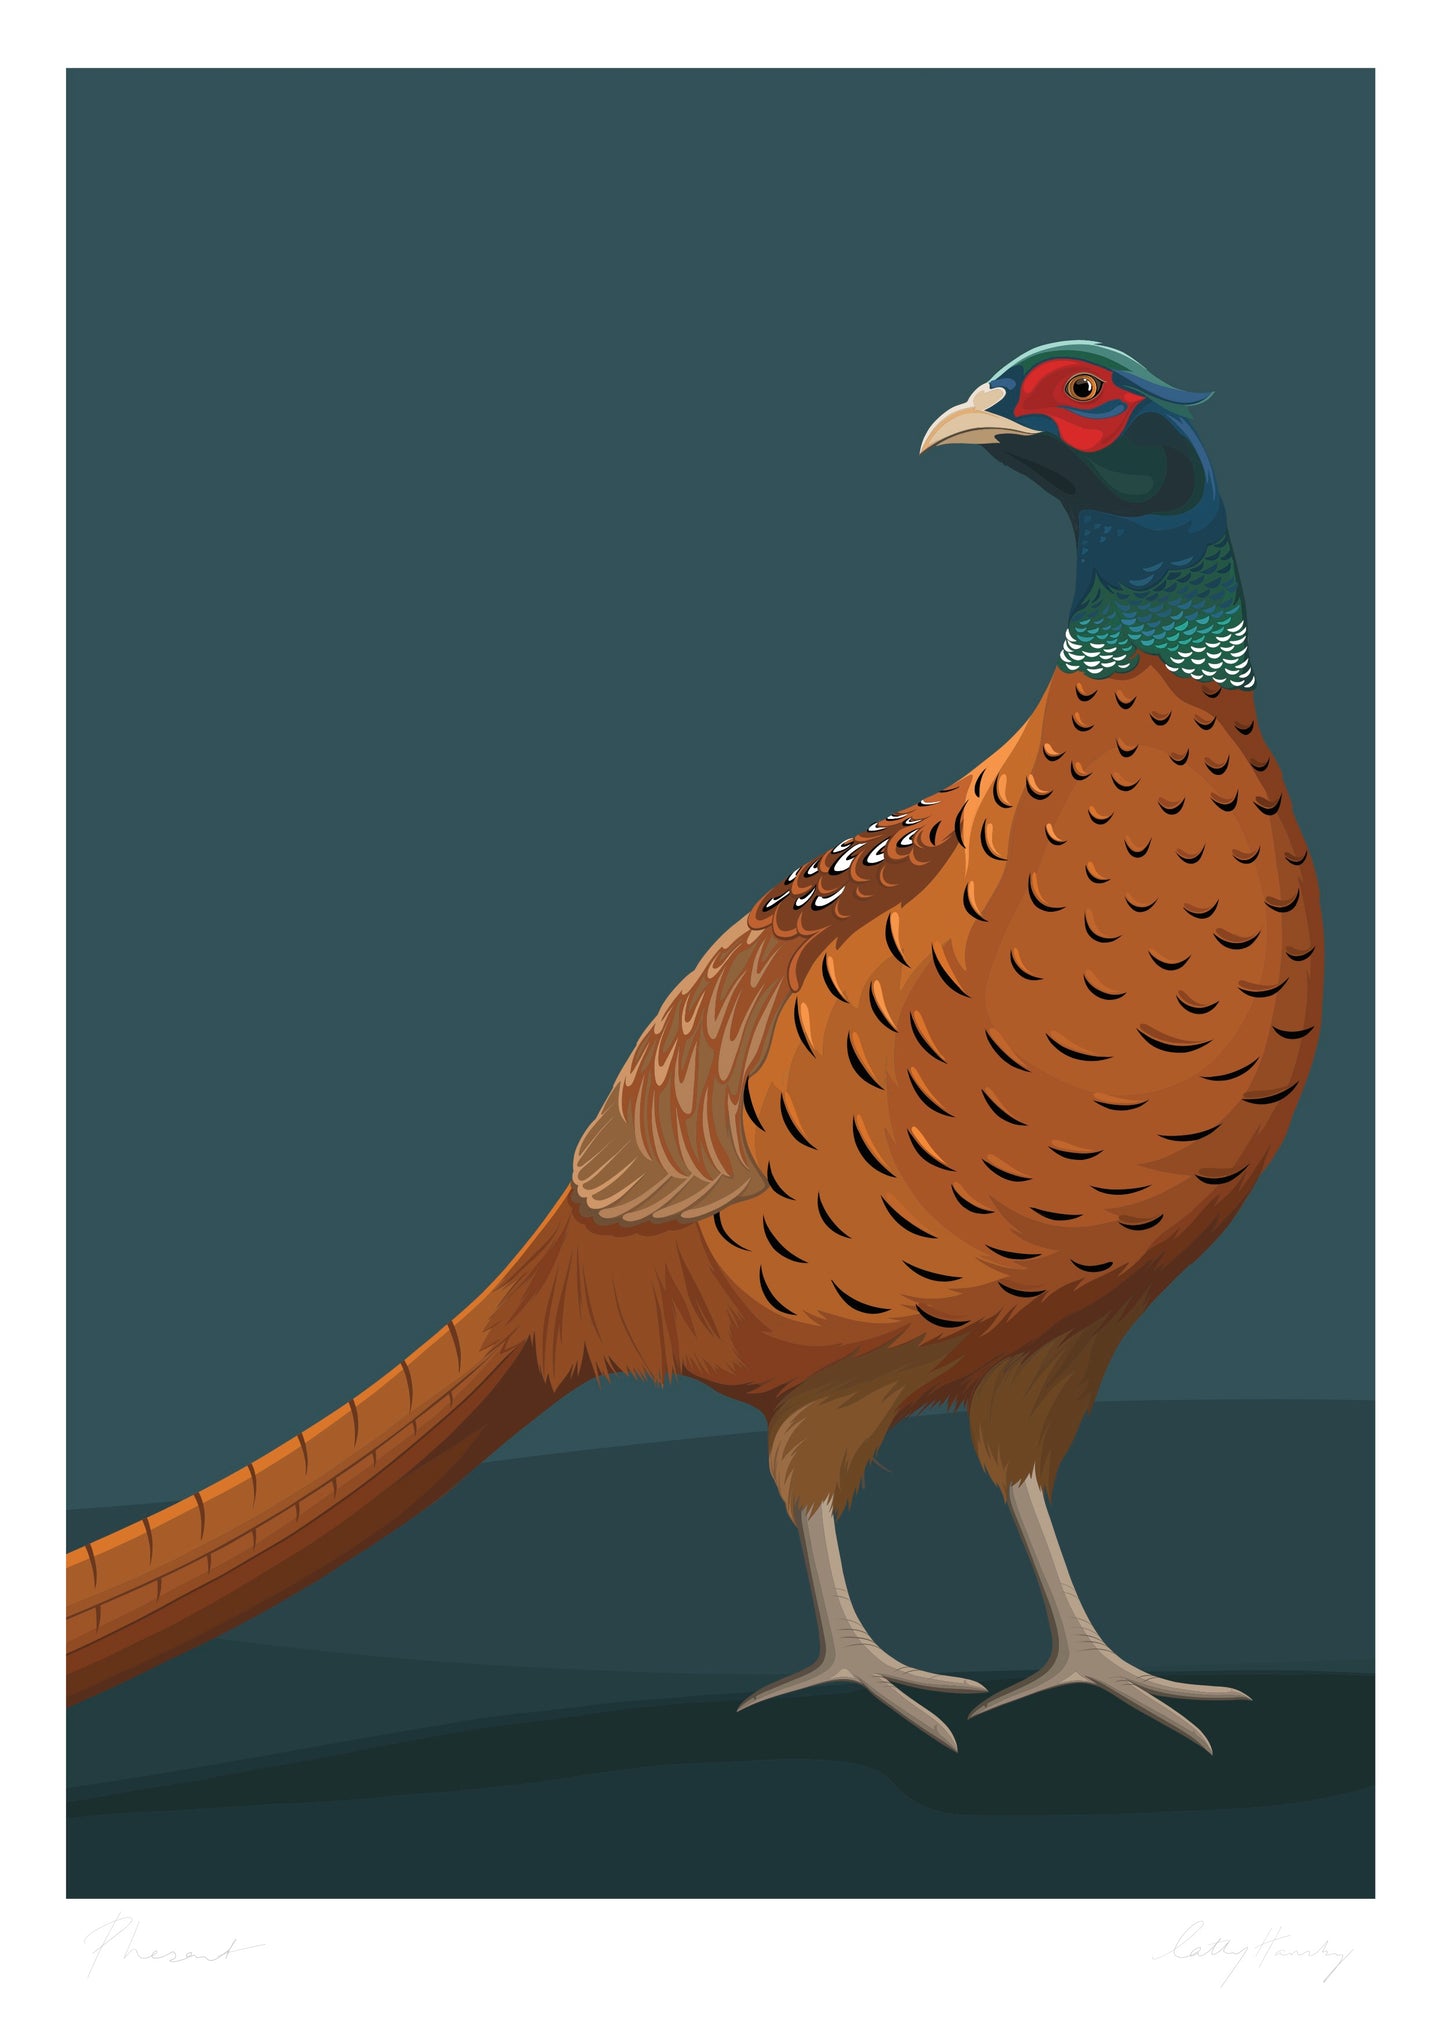 Art print of the Pheasant drawing by Hansby Design, New Zealand artist.